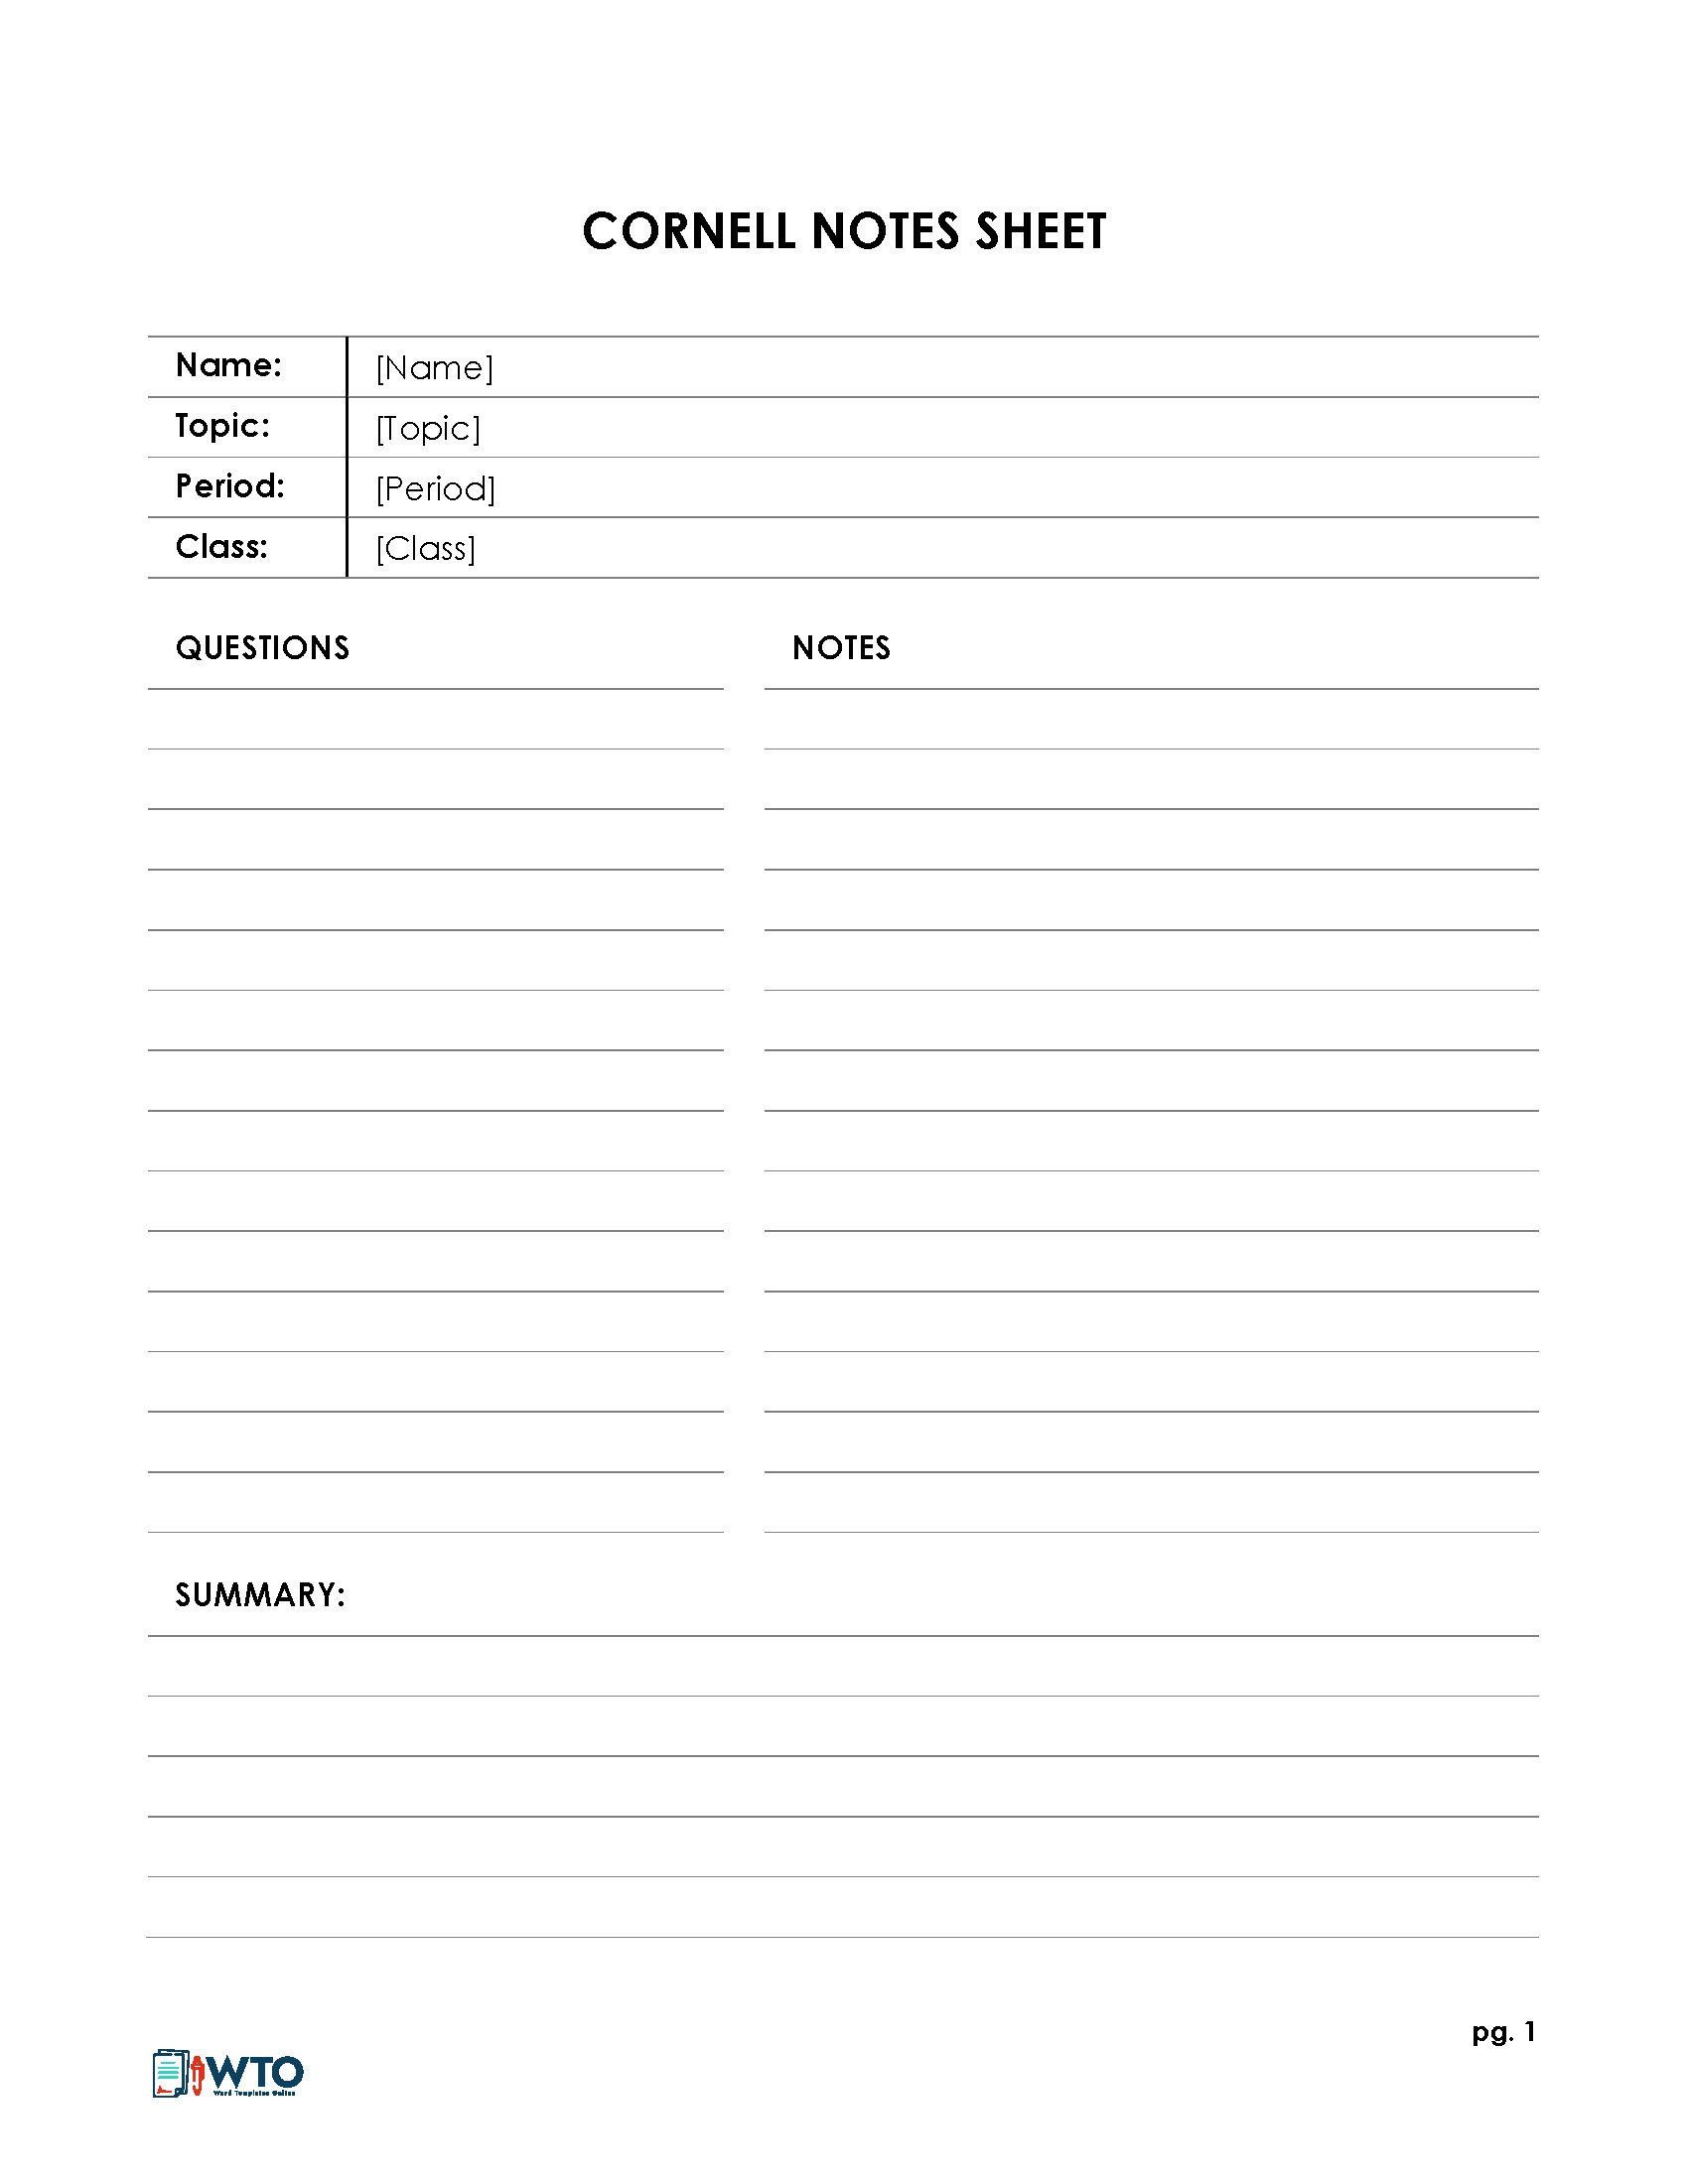 Excel Cornell Note Example Sample